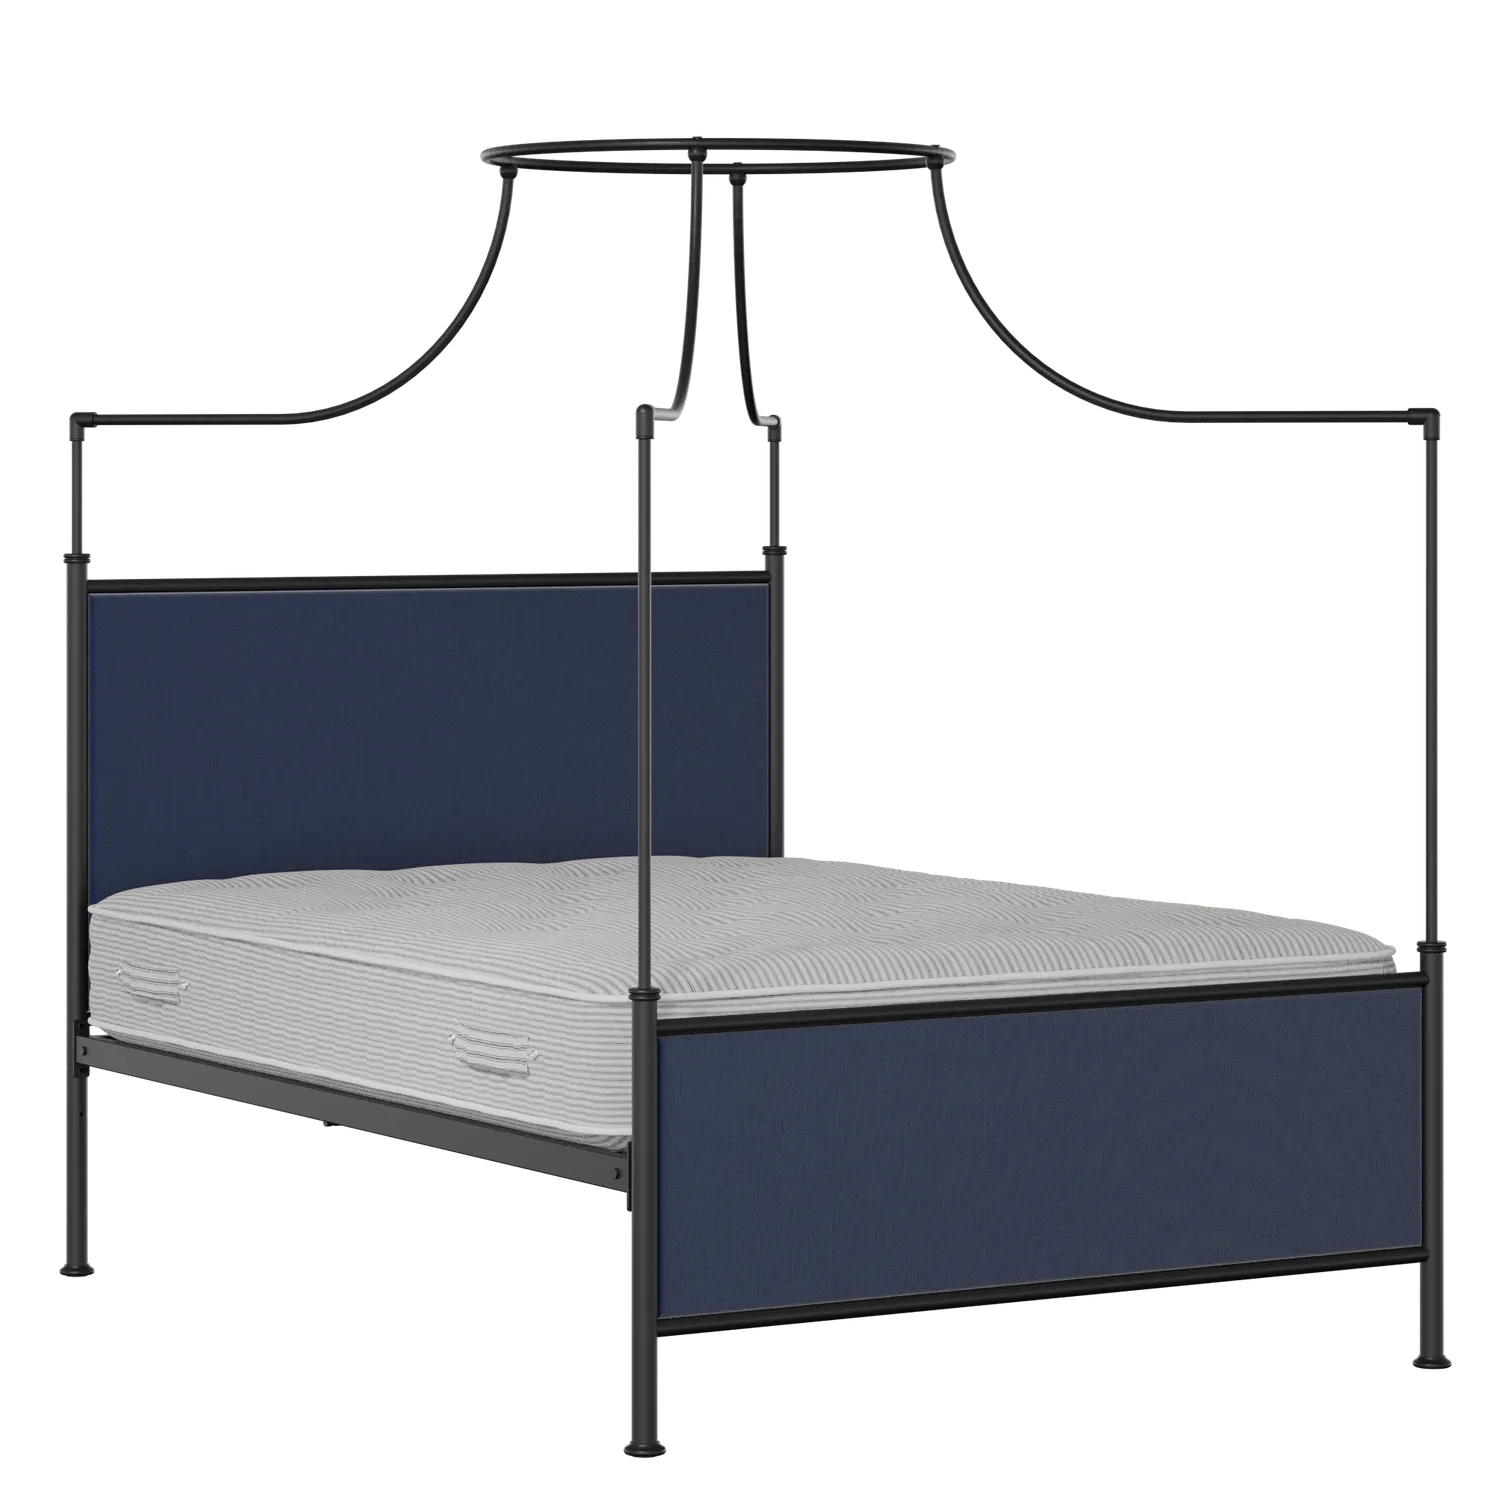 Waterloo iron/metal upholstered bed in black with blue fabric